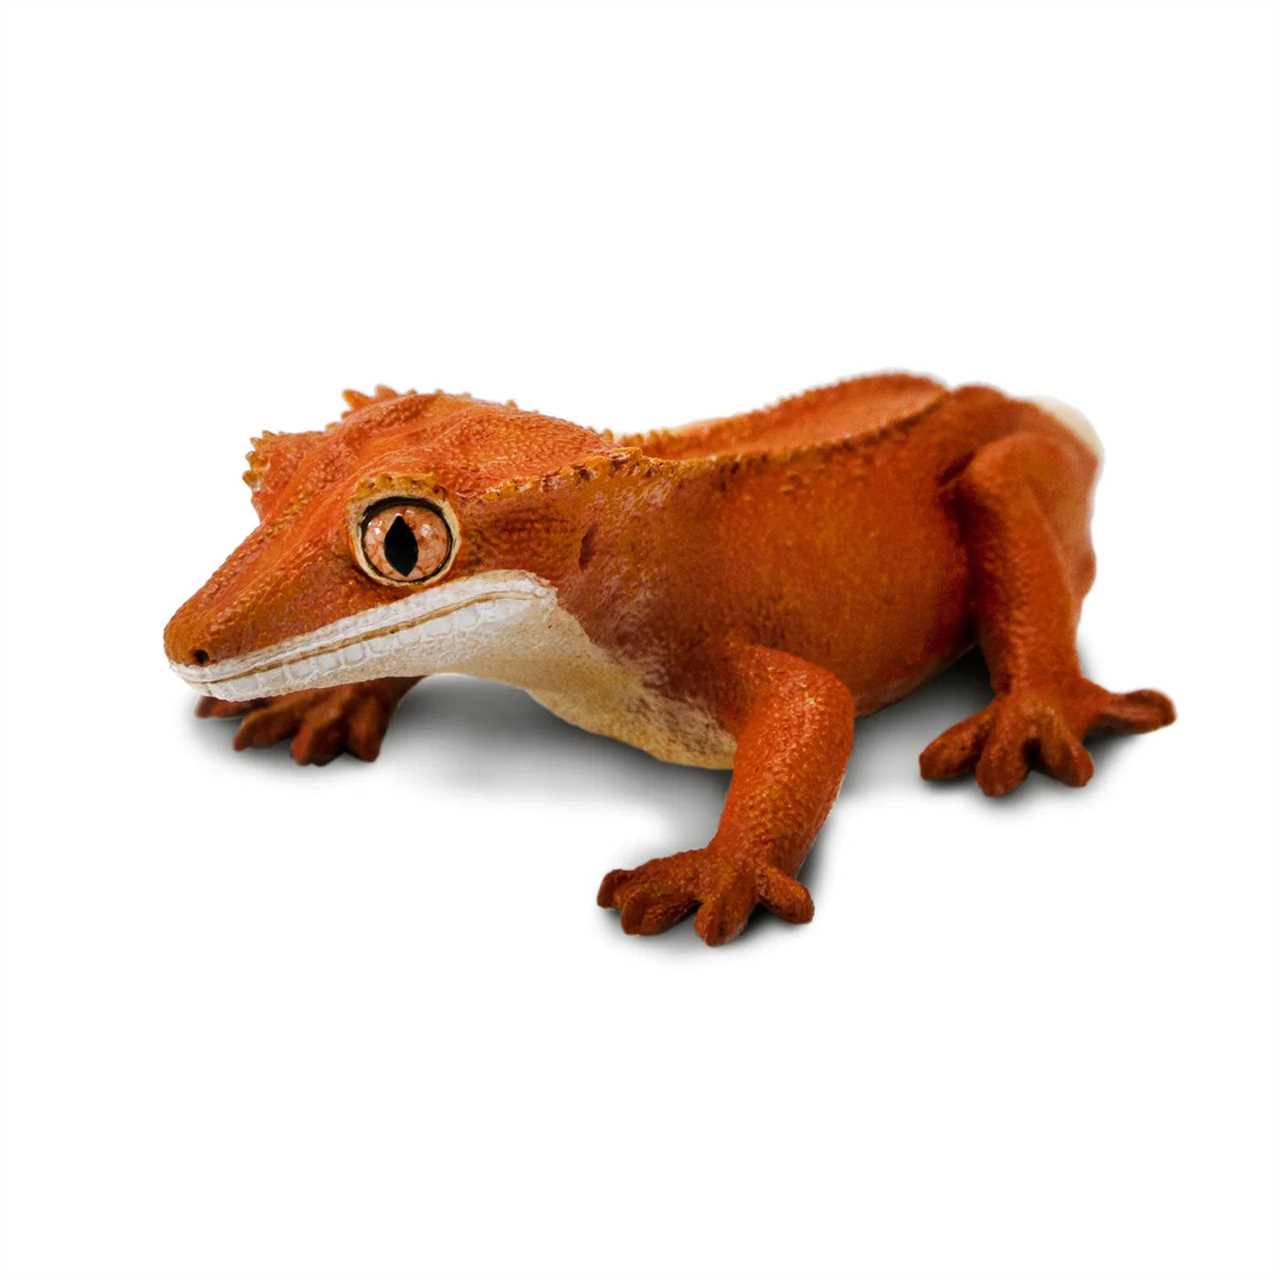 The Benefits of Stuffed Crested Gecko Plush Toys